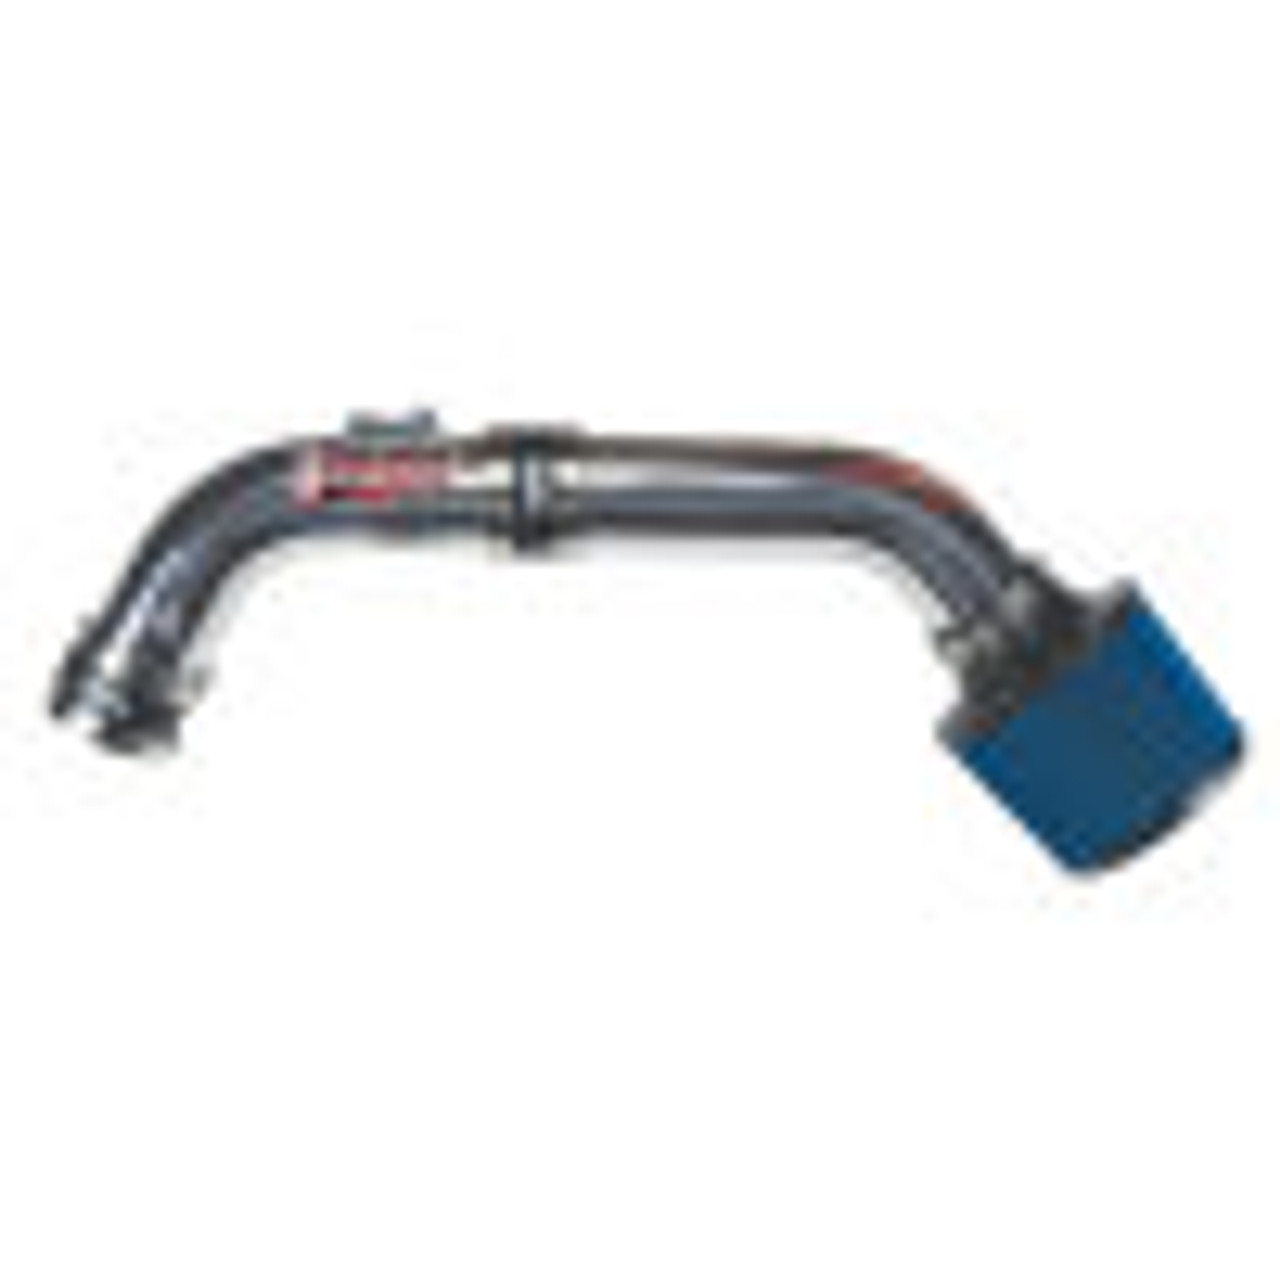 MAZDA COLD AIR INTAKE SYSTEM.  
Color: Polished.  Intake Color: Polished.  Filter Color: Blue